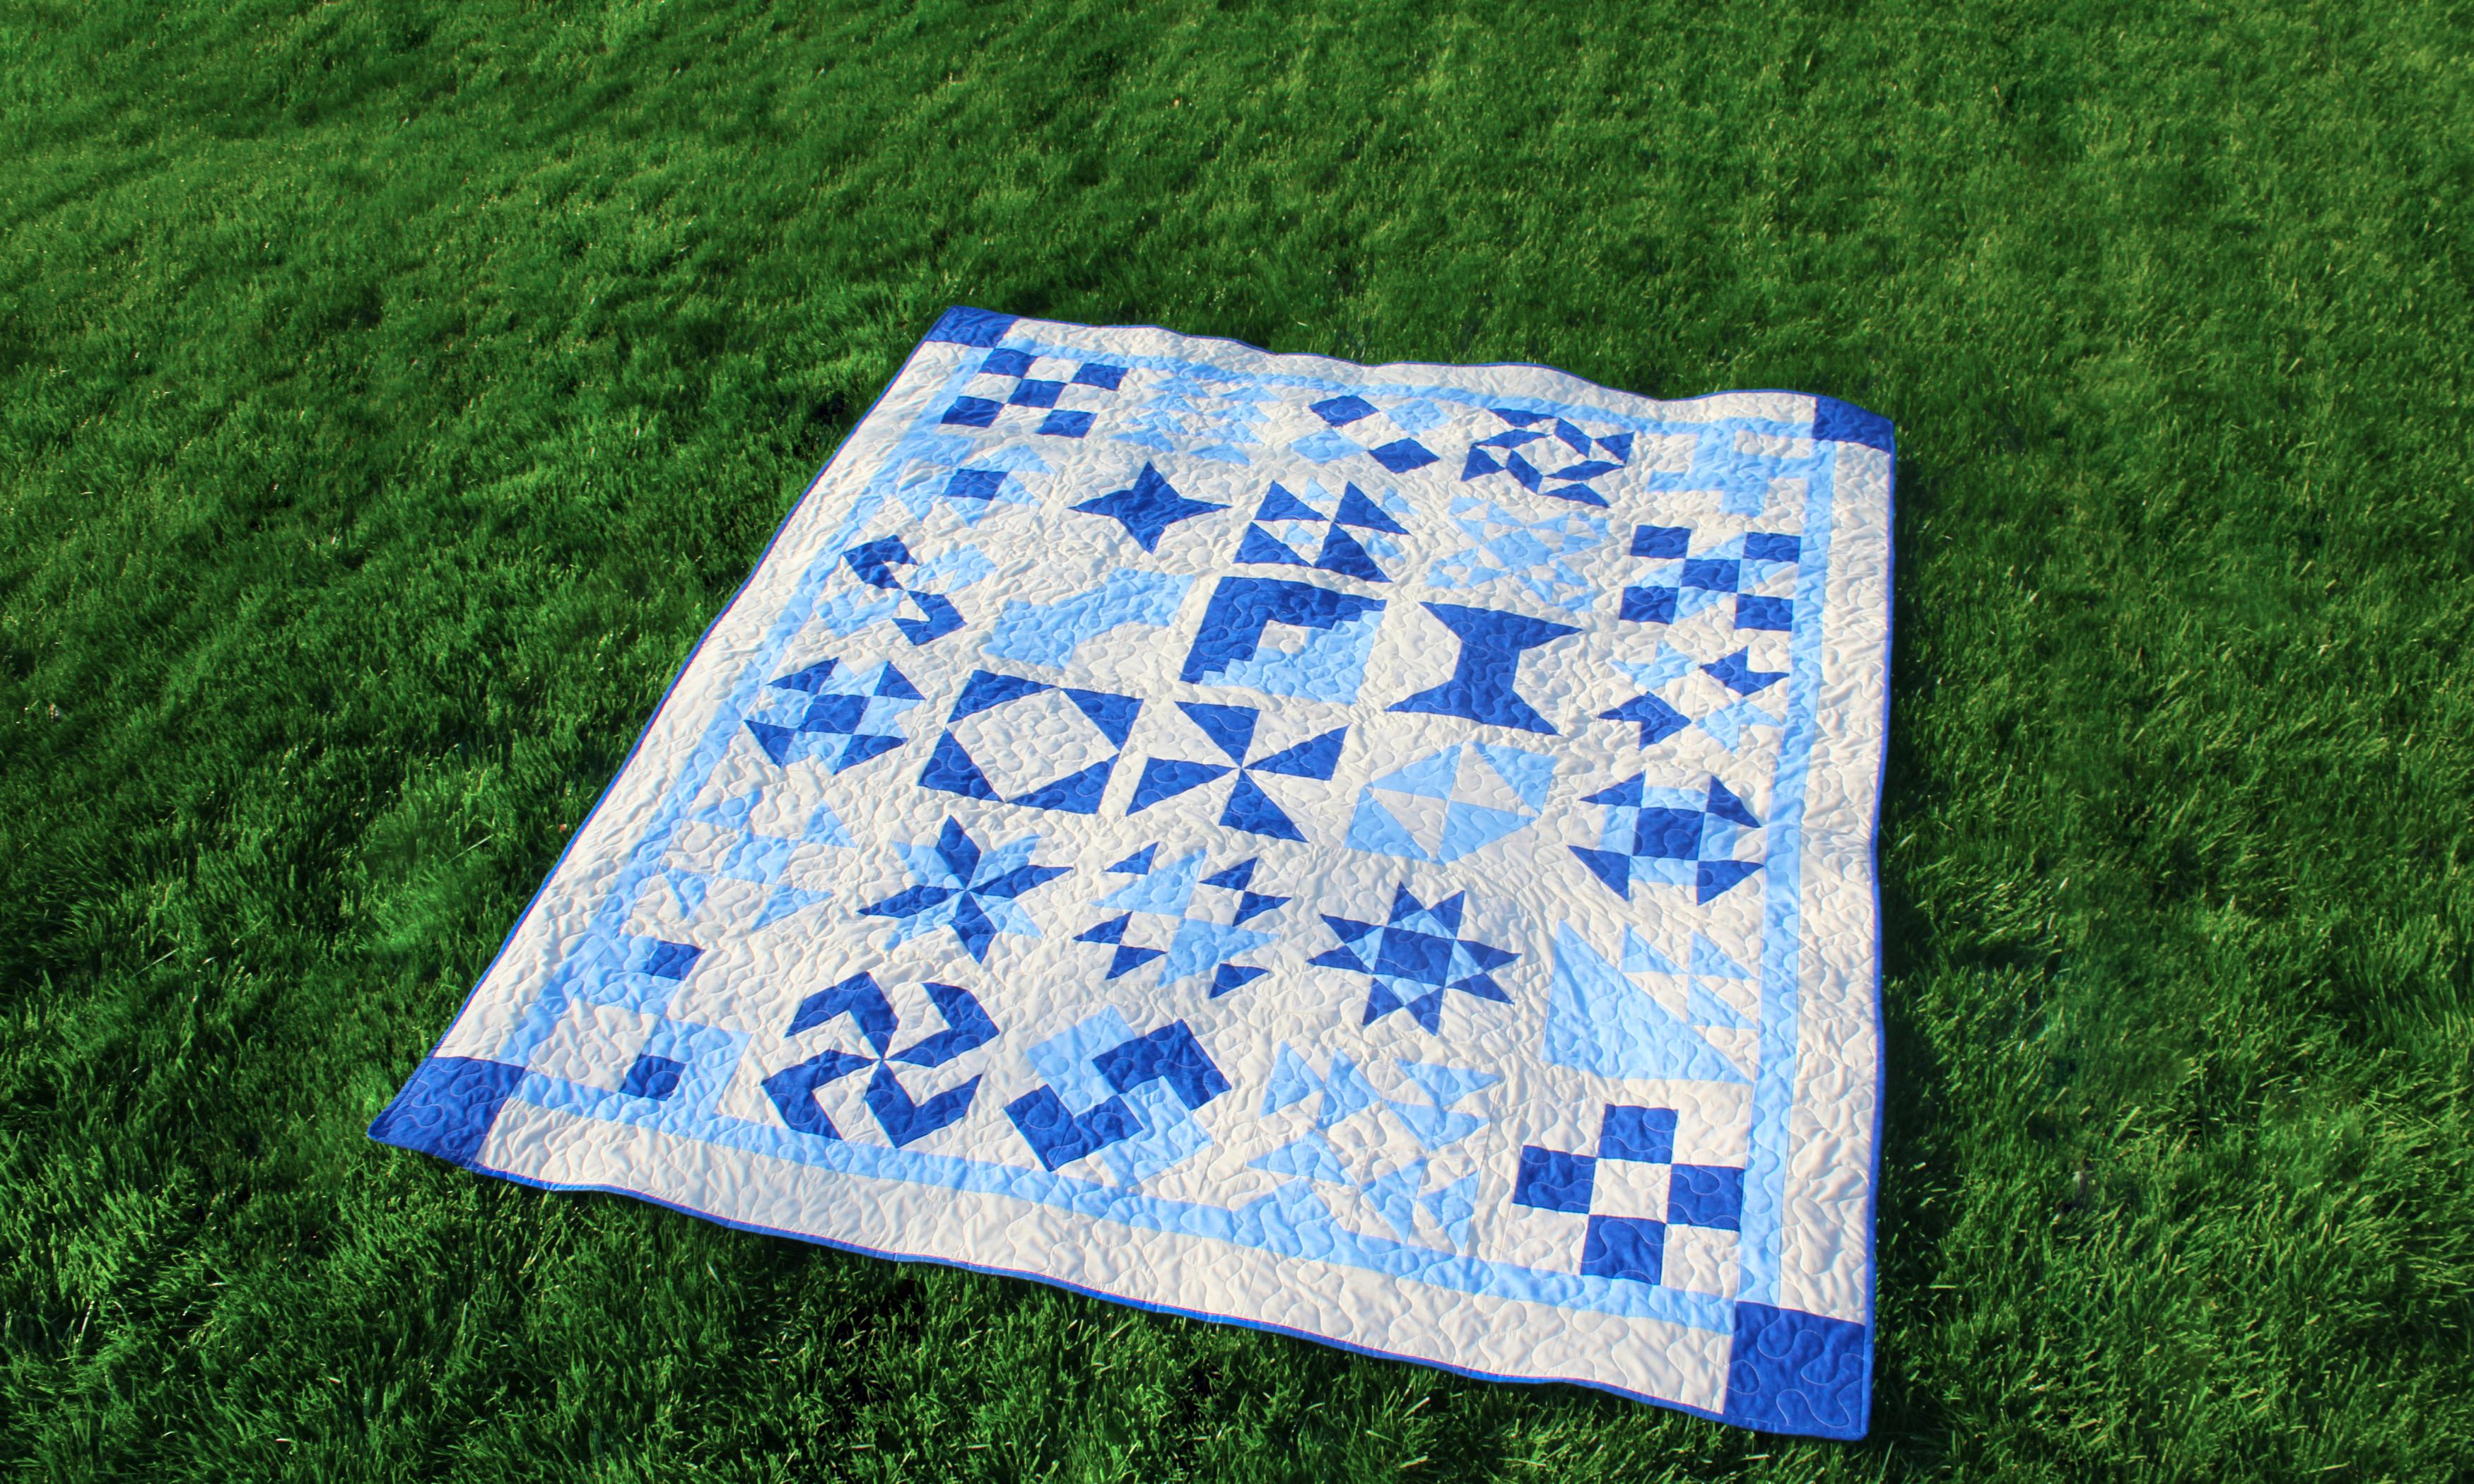 blue and white quilt on grass